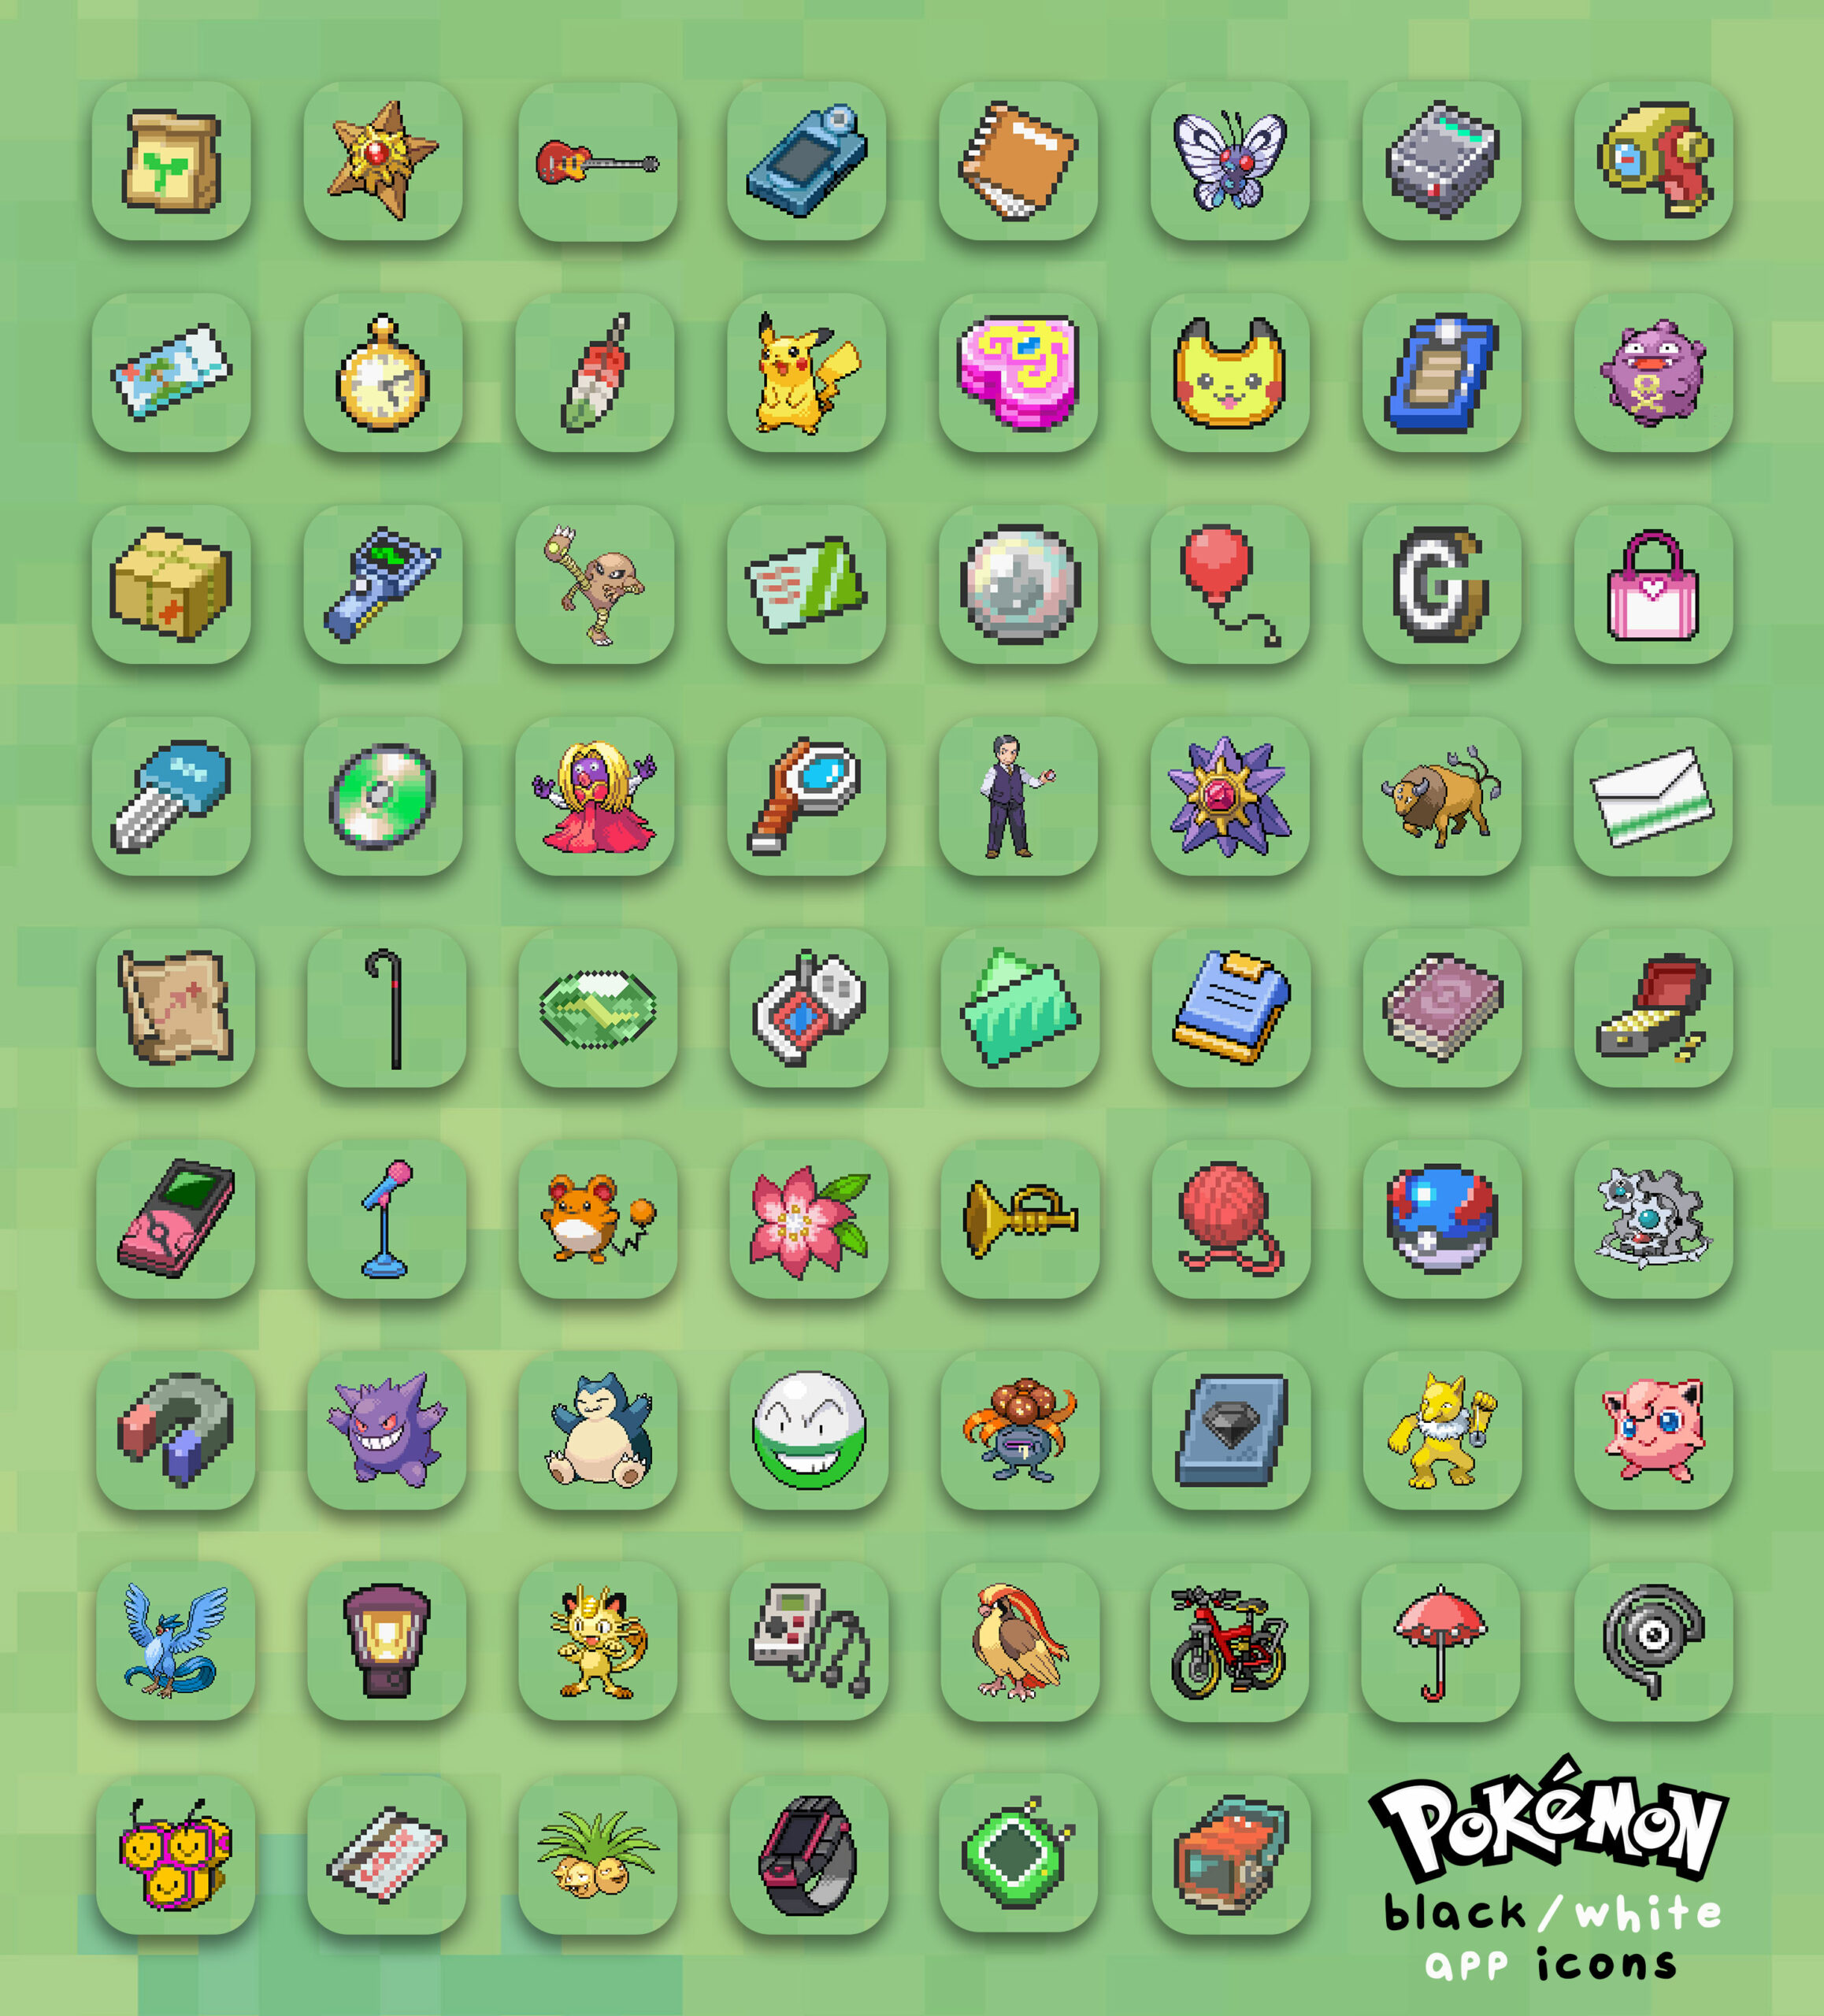 pokemon black and white app icons pack preview 2